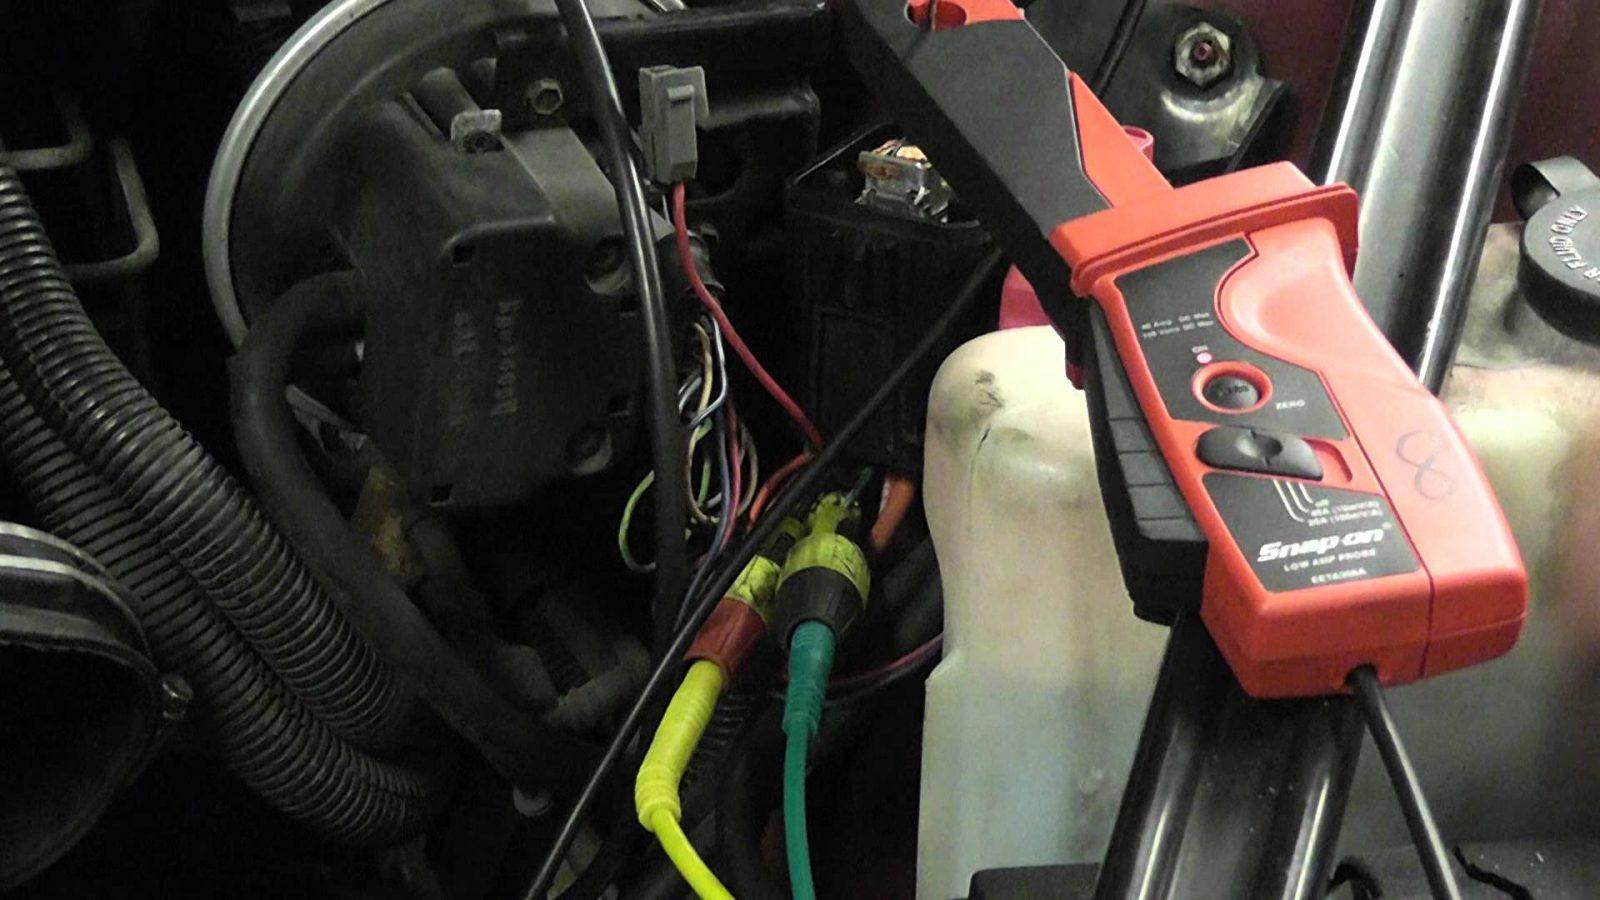 Causes car loses power while driving - CAR FROM JAPAN 05 suzuki aerio fuse box 